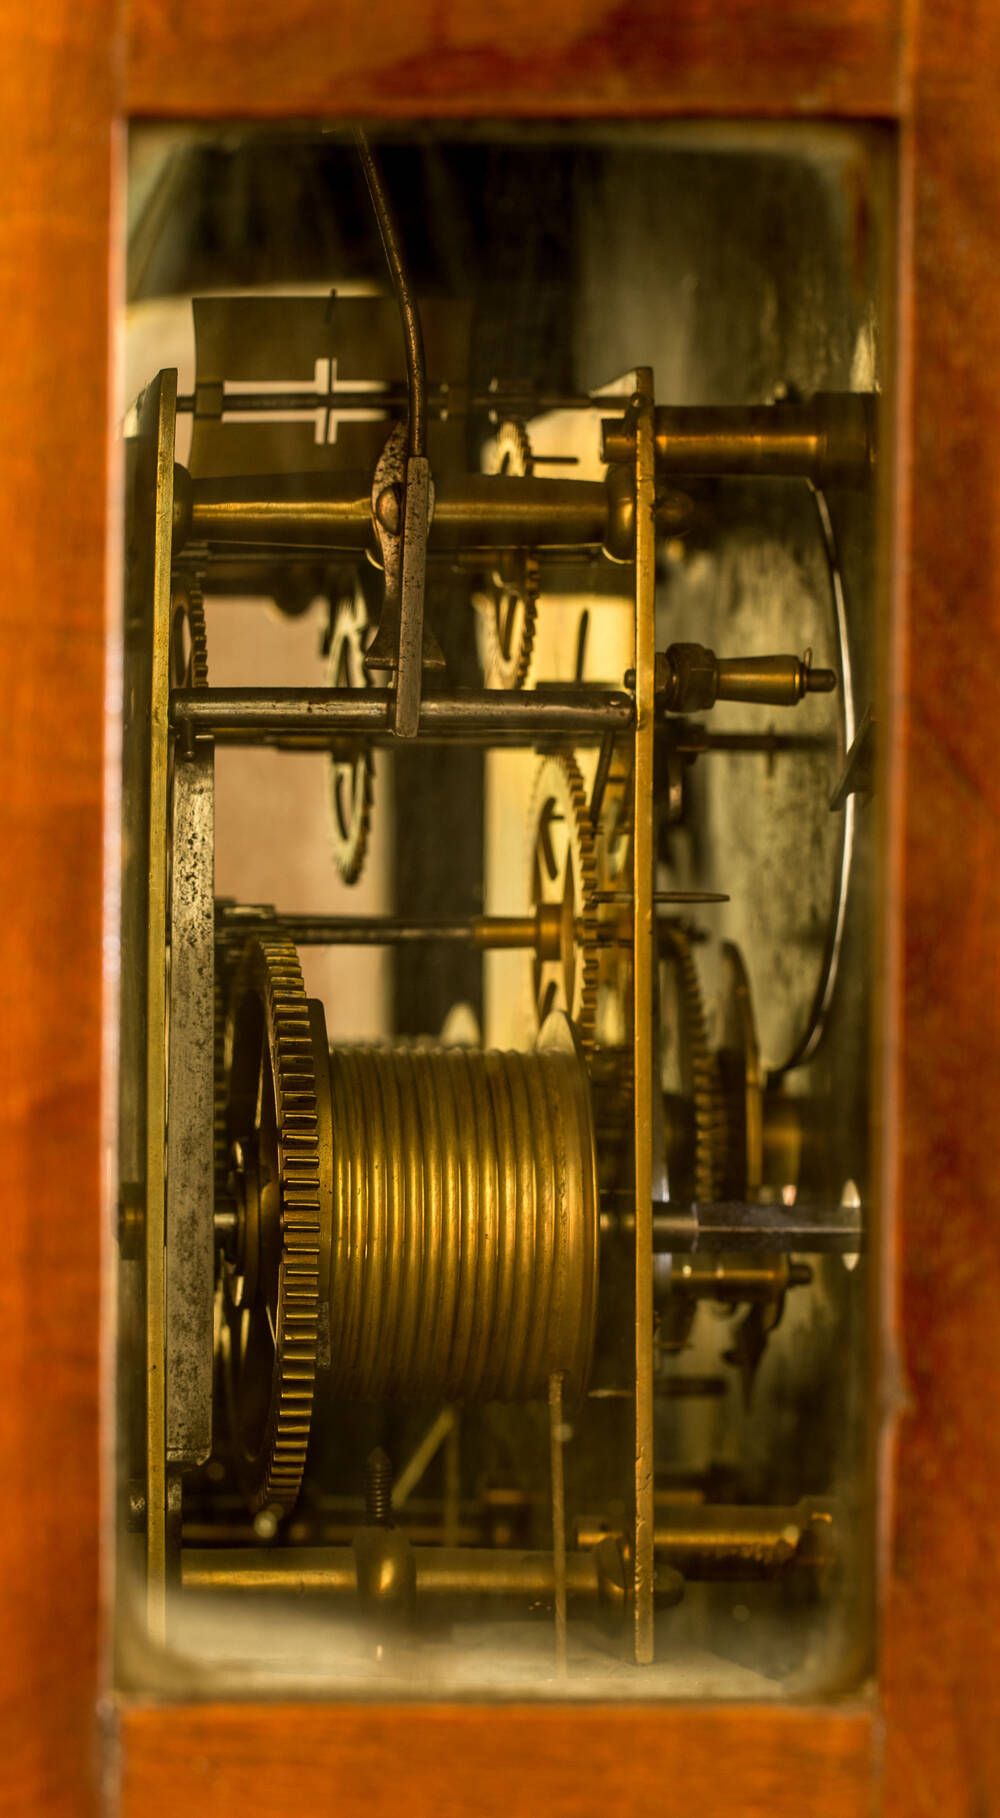 A view of a longcase clock mechanism, with coils and cogs in a wooden surround.